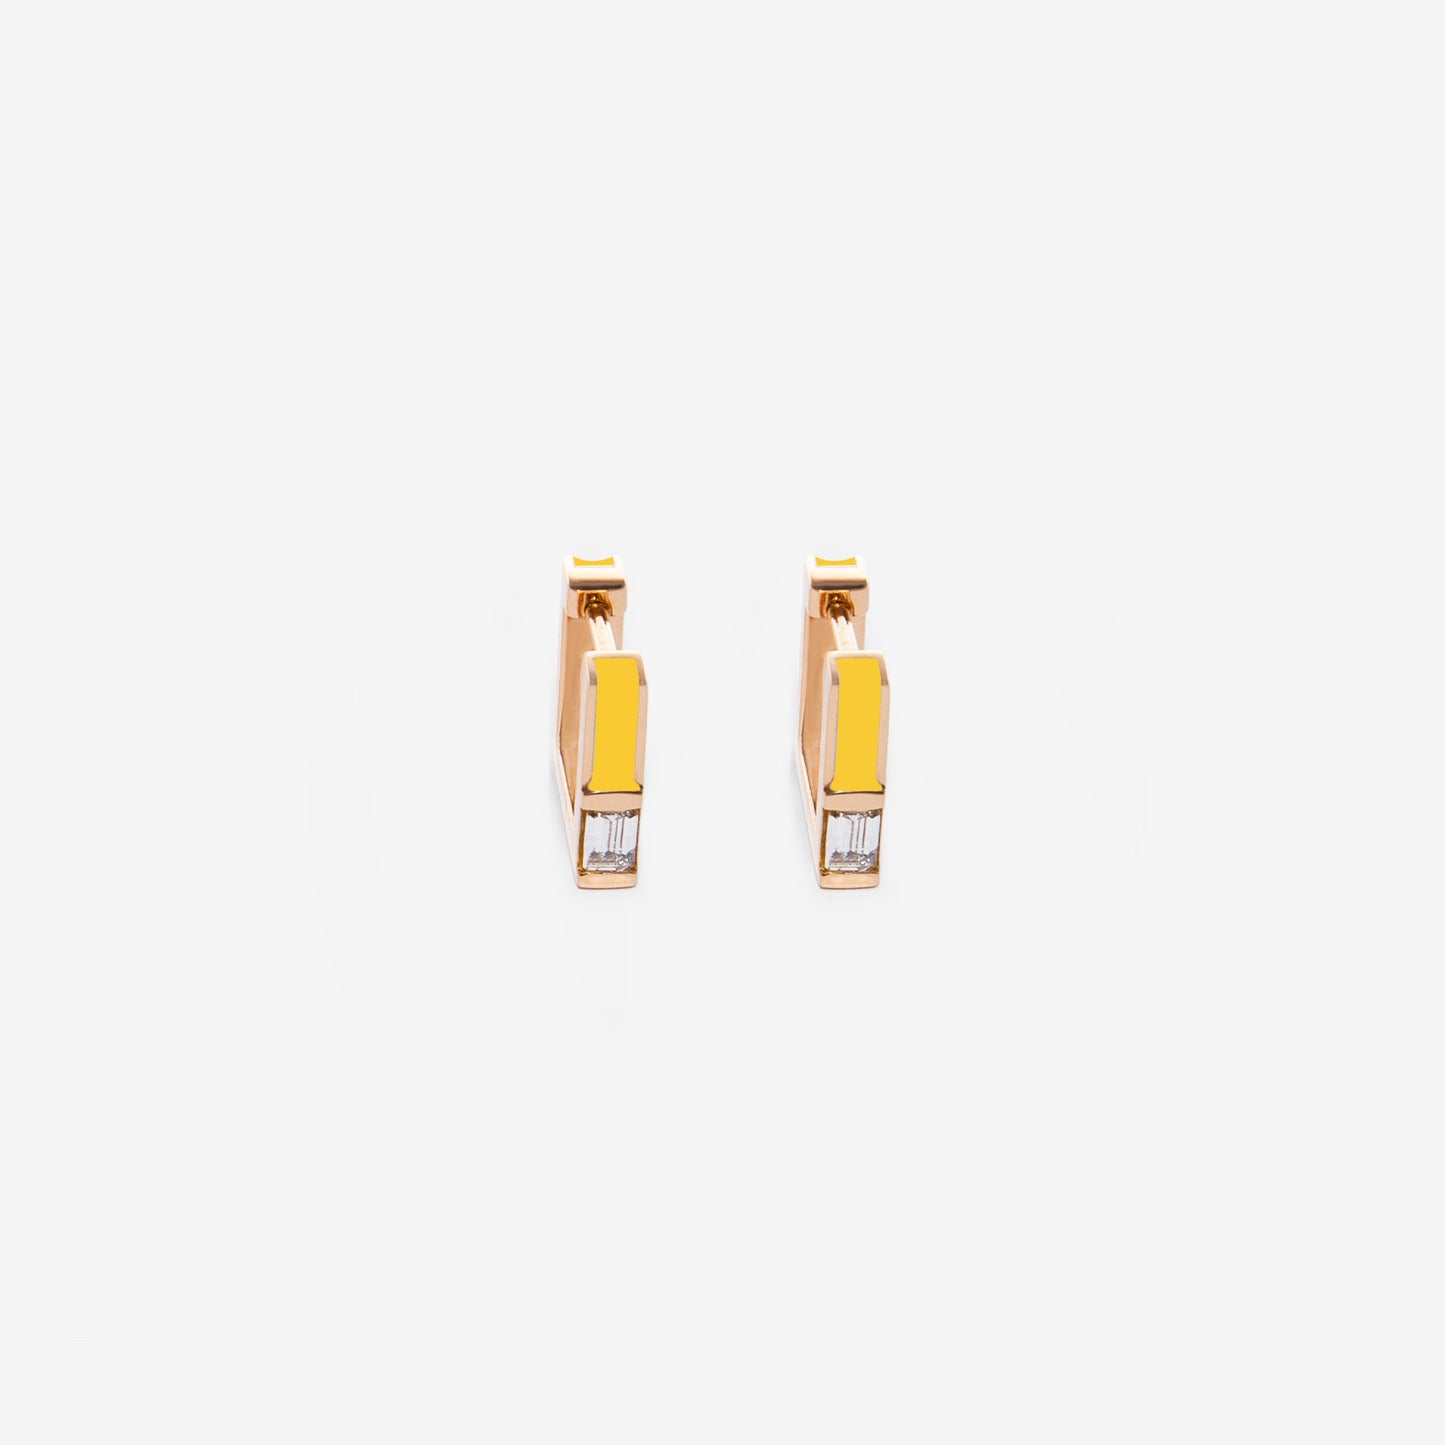 Square yellow earrings with diamonds